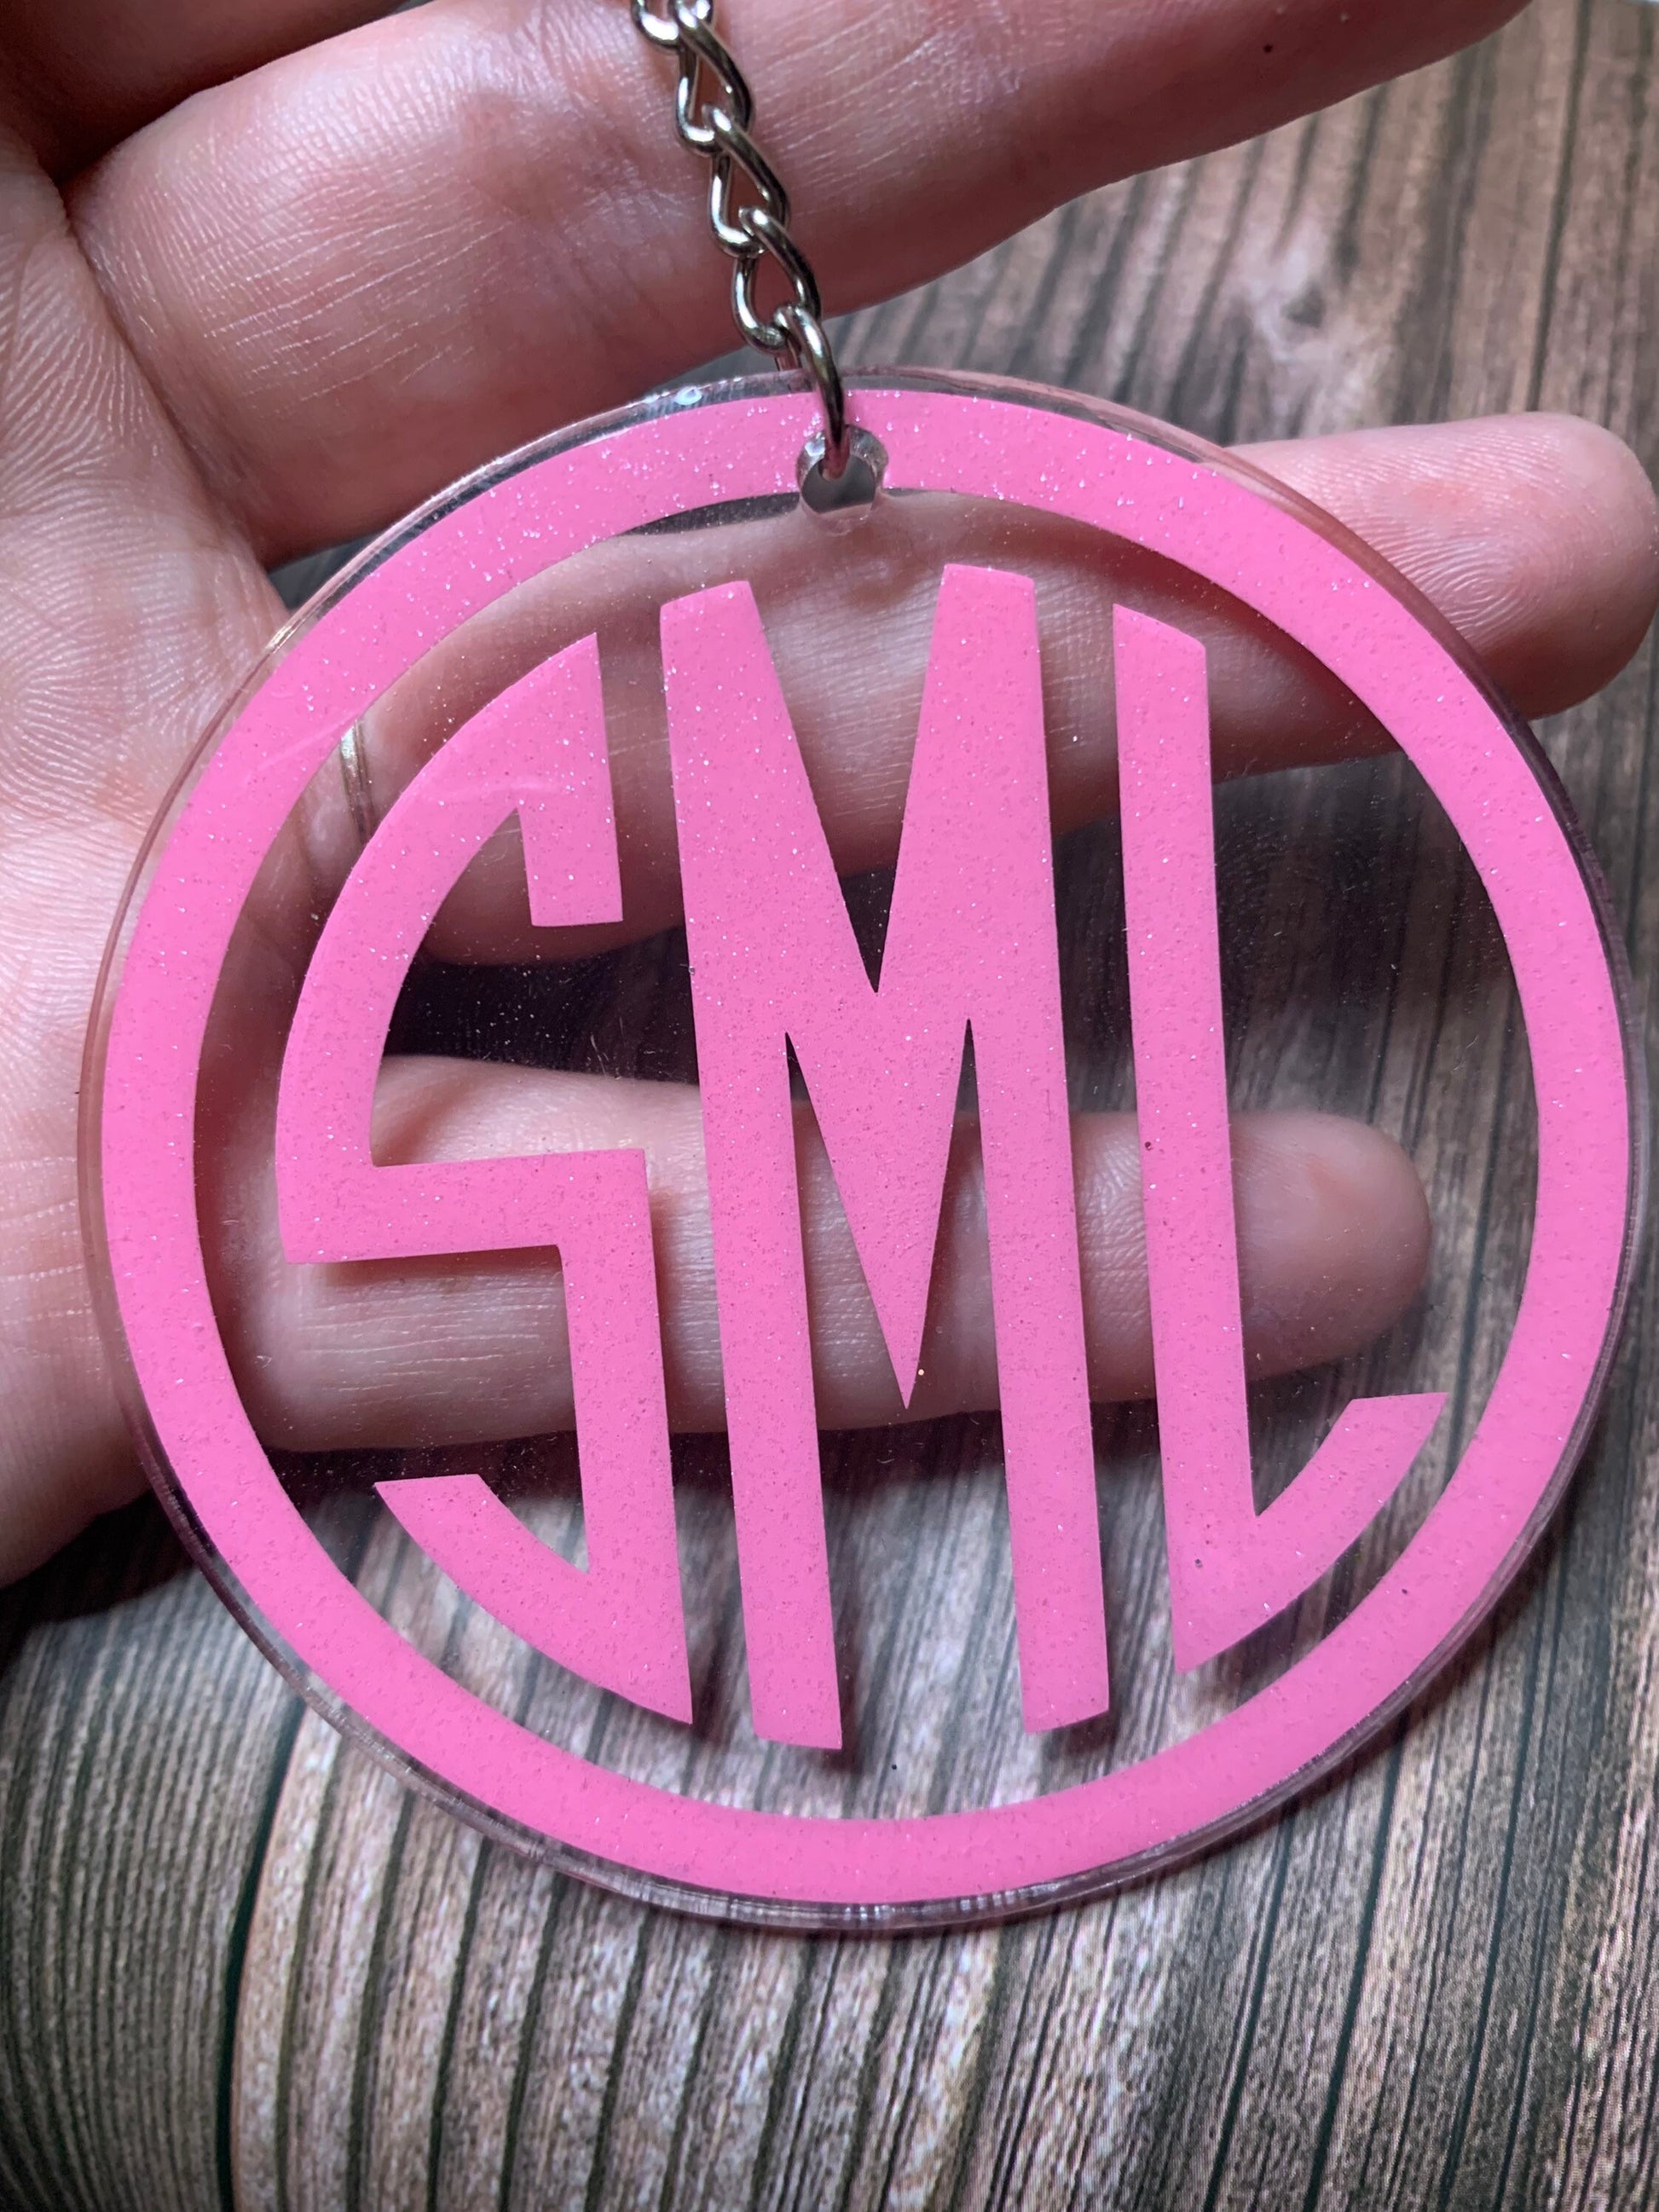 Monogram Keychain- Accessories- gifts for her- perfect gift-monograms-personalized gifts for mom